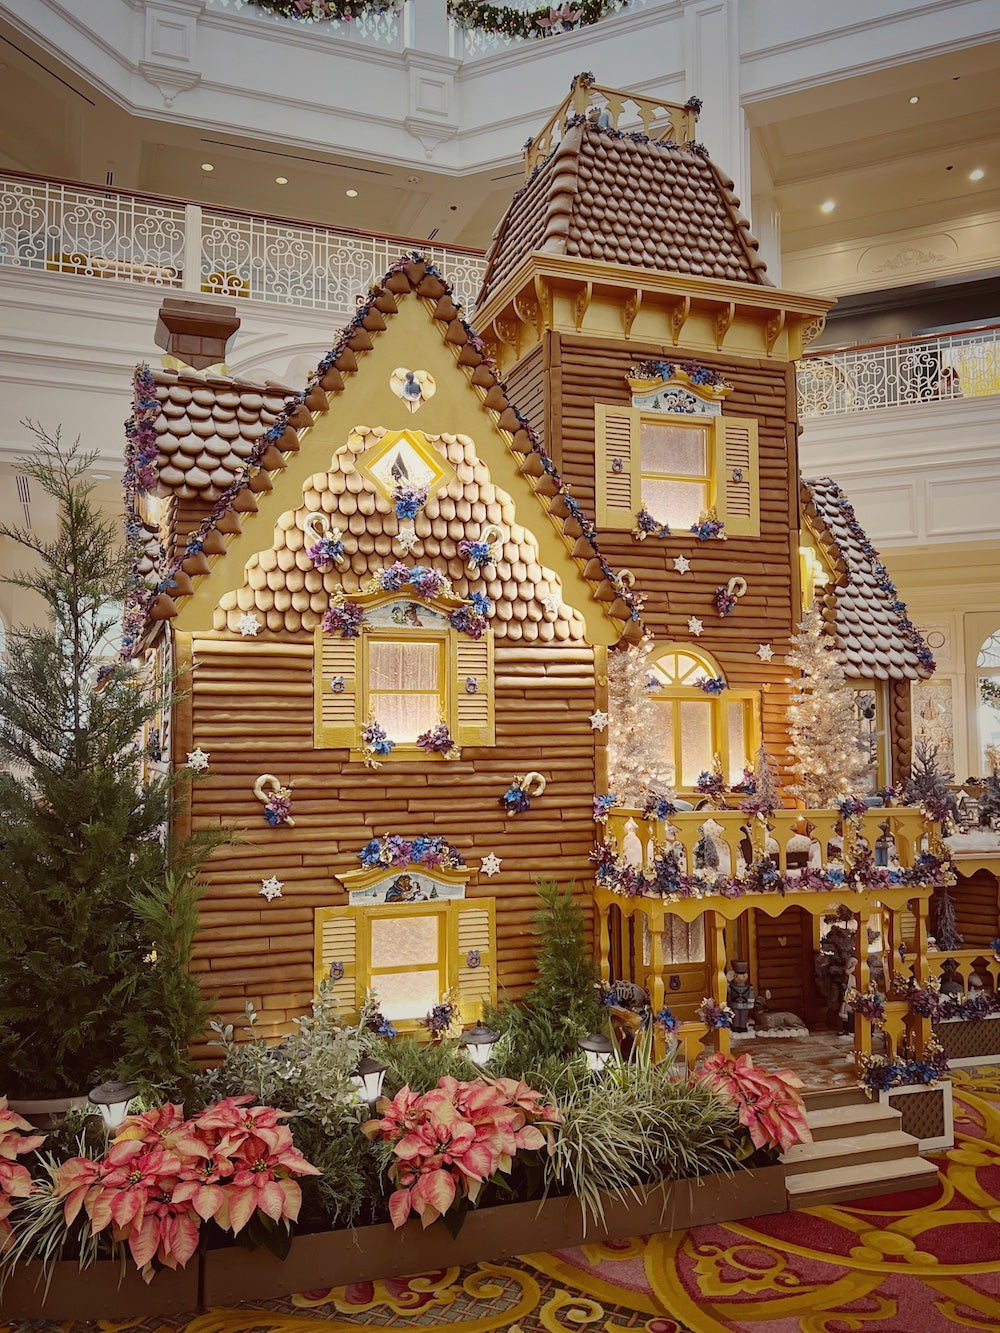 Walt Disney World Life Size Gingerbread House, located within The Grand Floridian Resort.